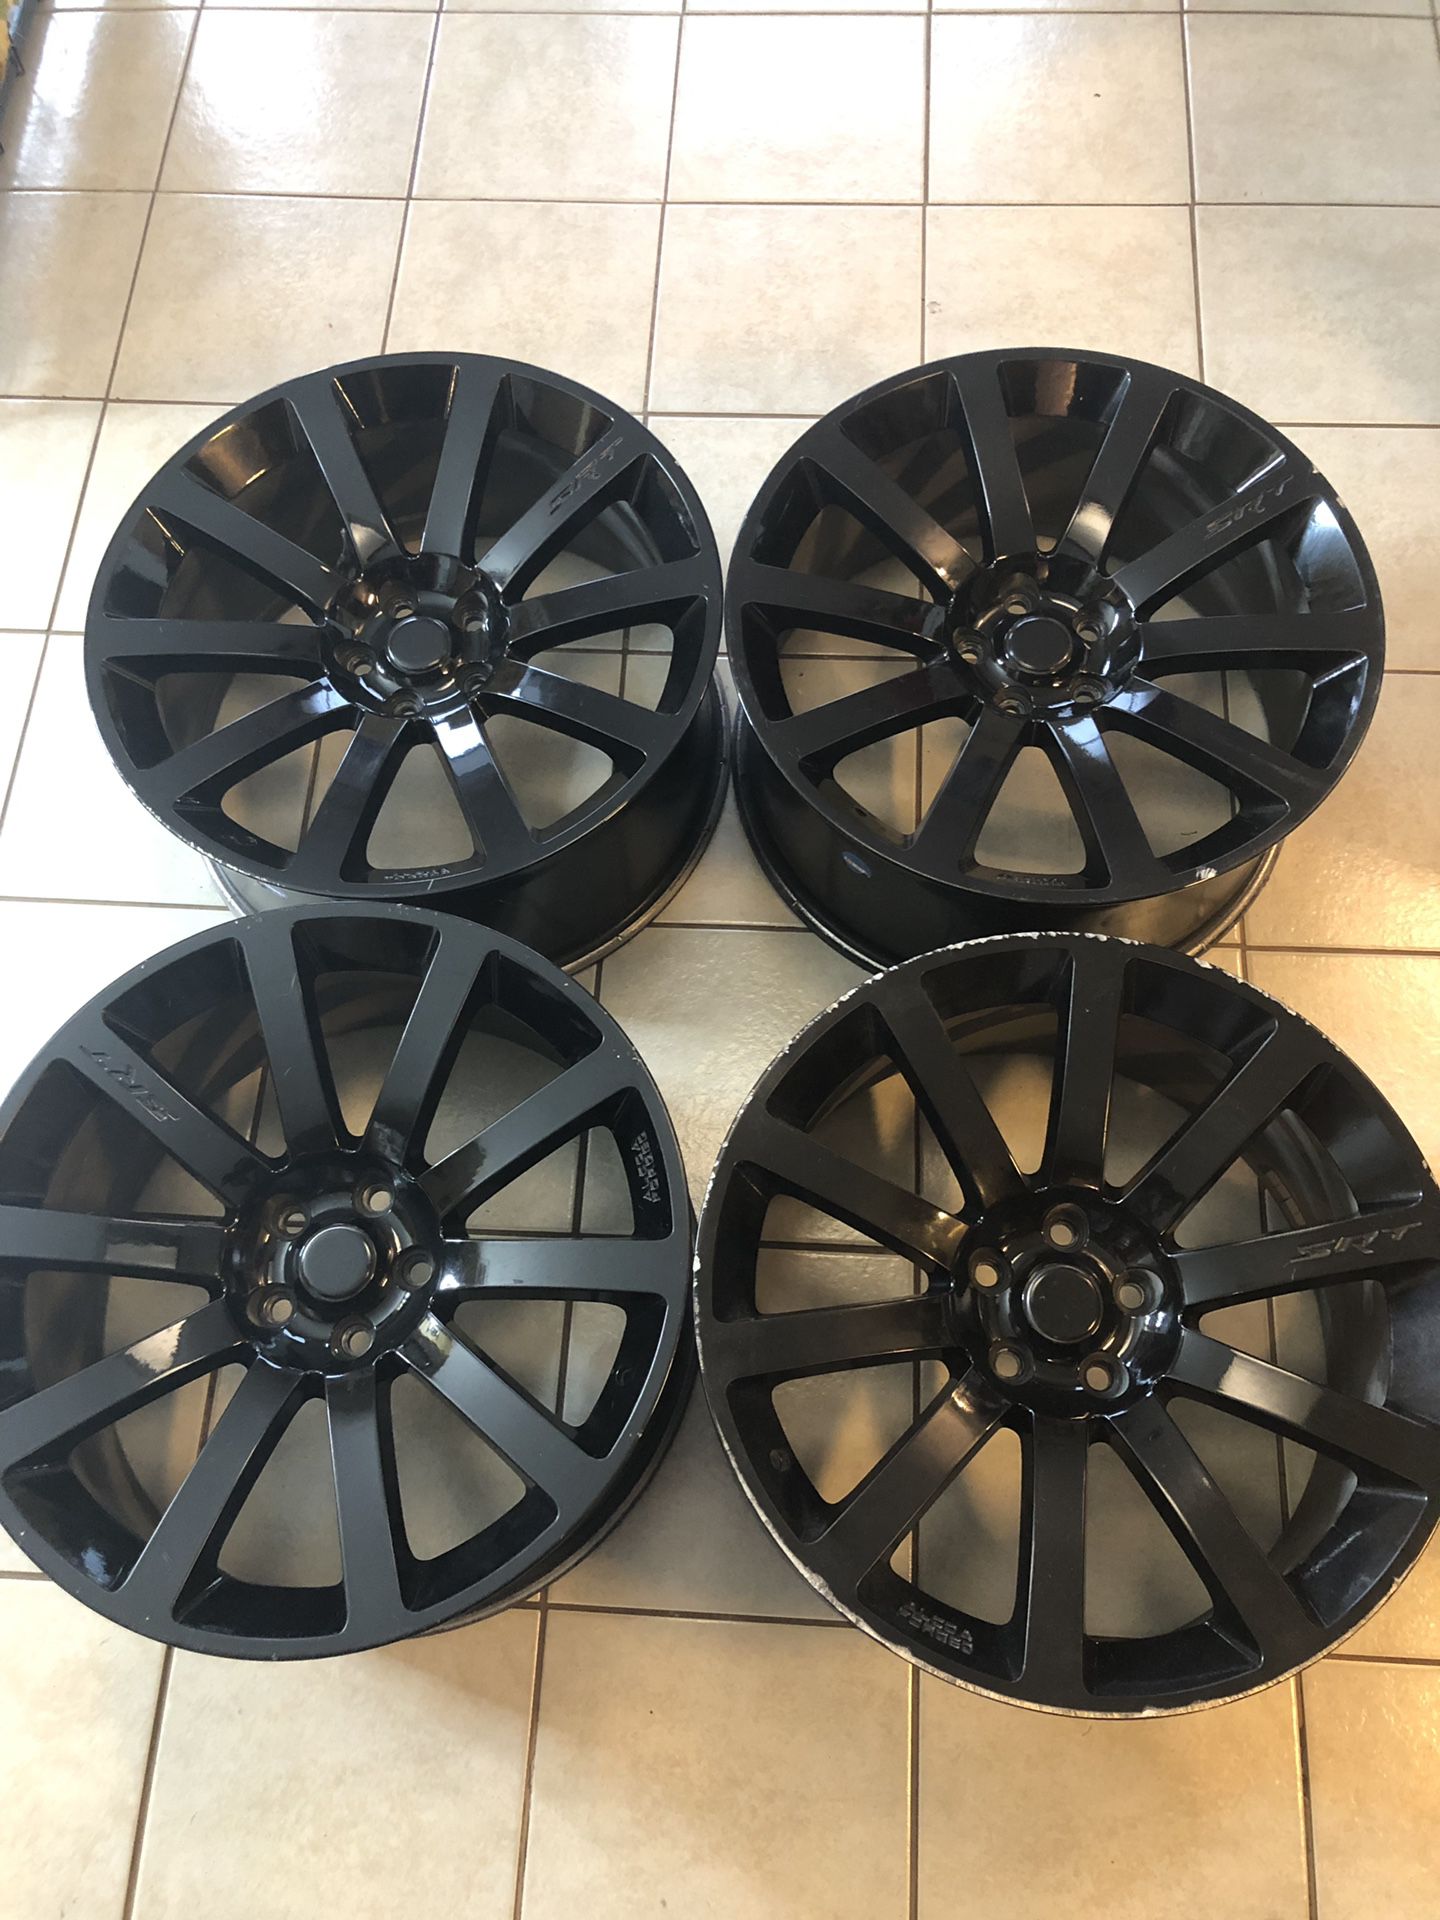 20in Blacked put Rims for CHARGER, CHALLENGER, or whatever you can put them on.